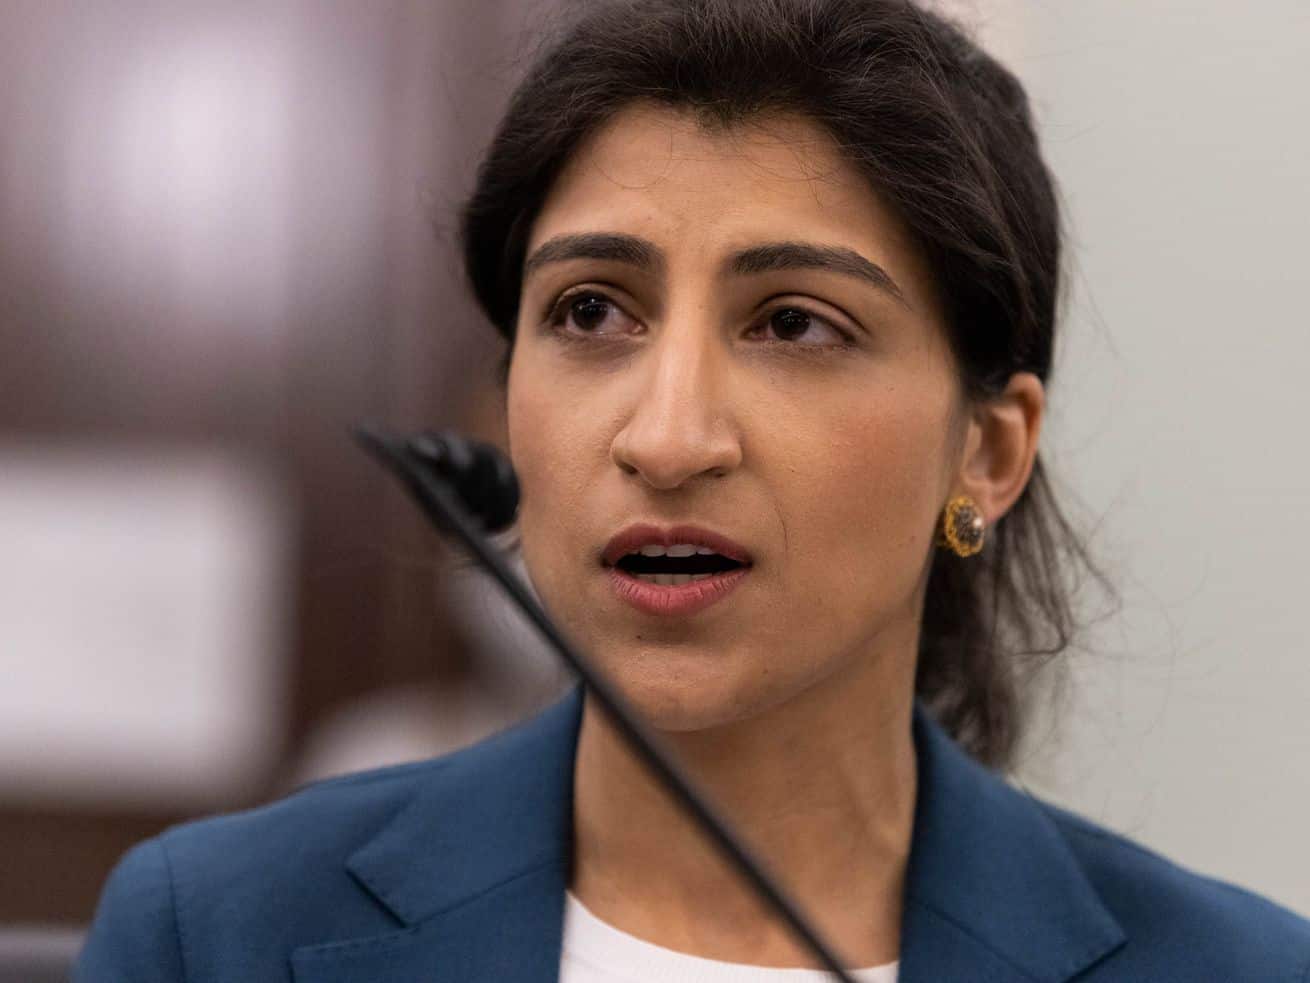 Lina Khan will be chair of the Federal Trade Commission